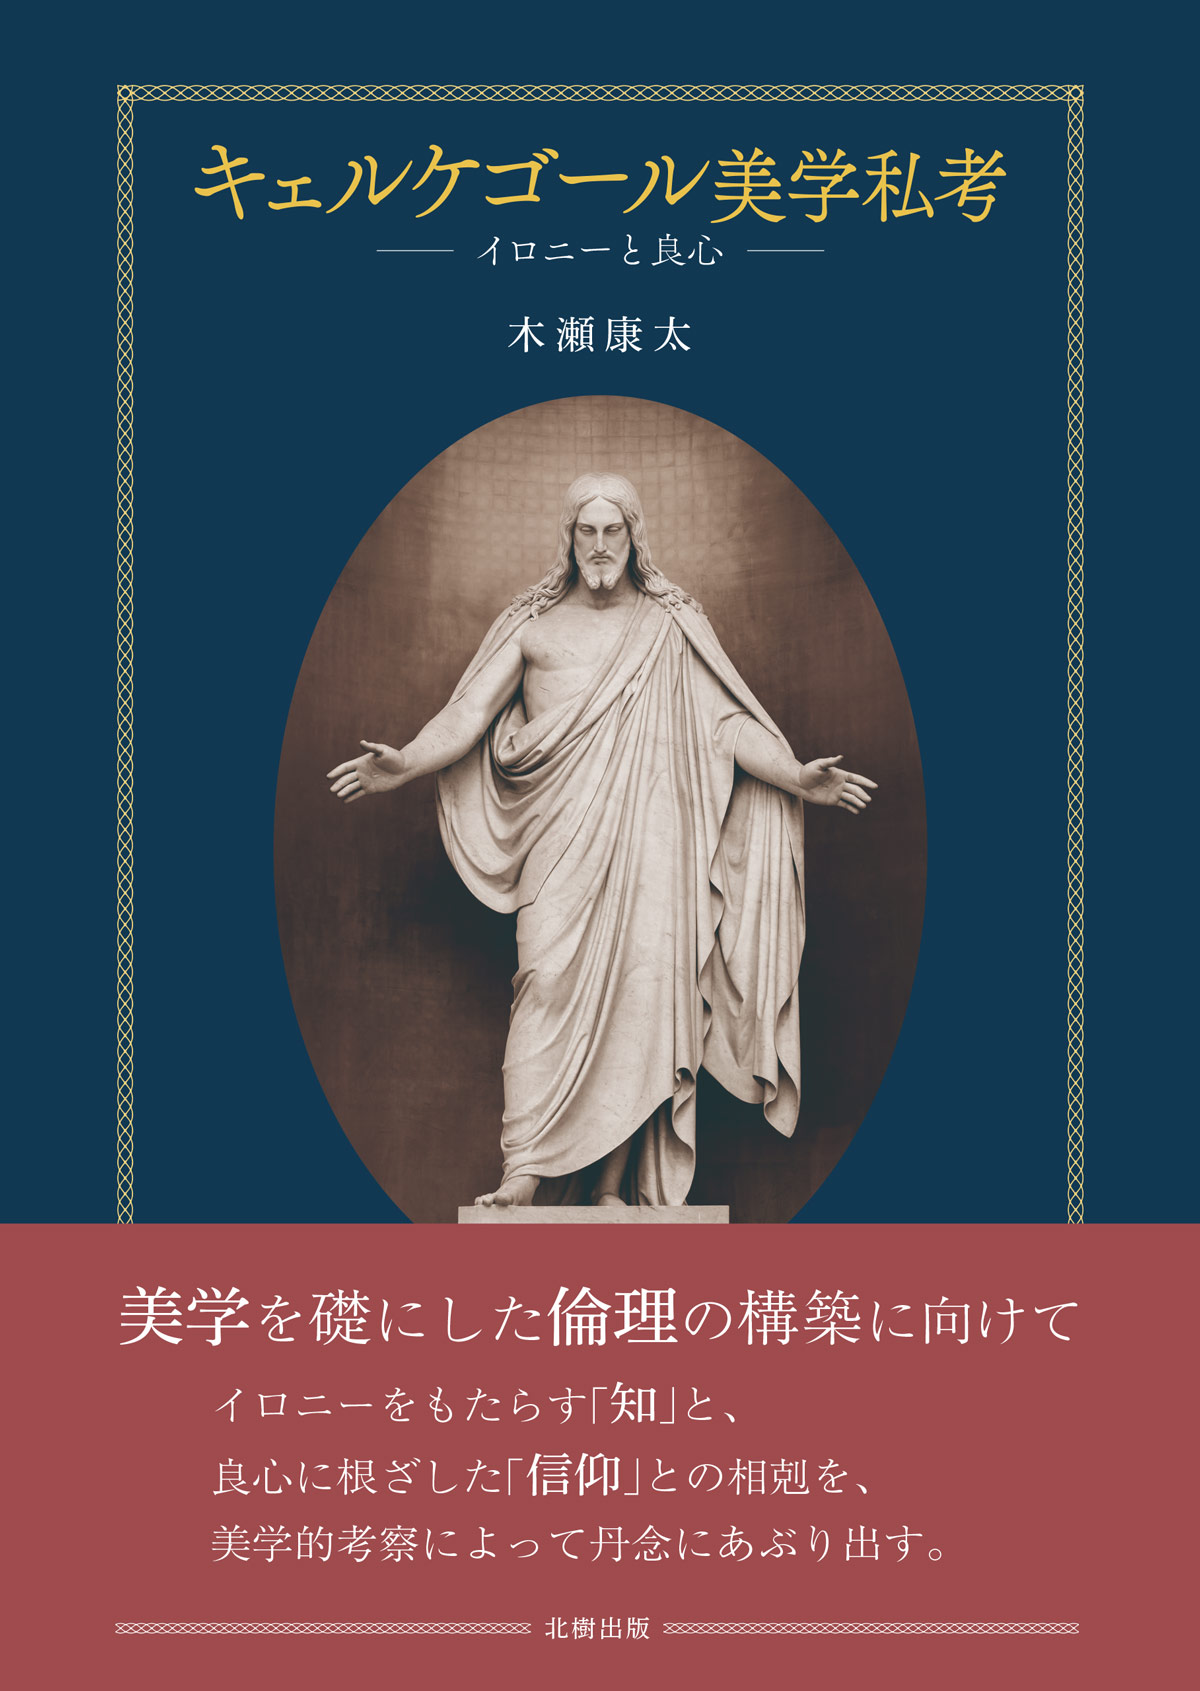 A navy cover with christ statue photo